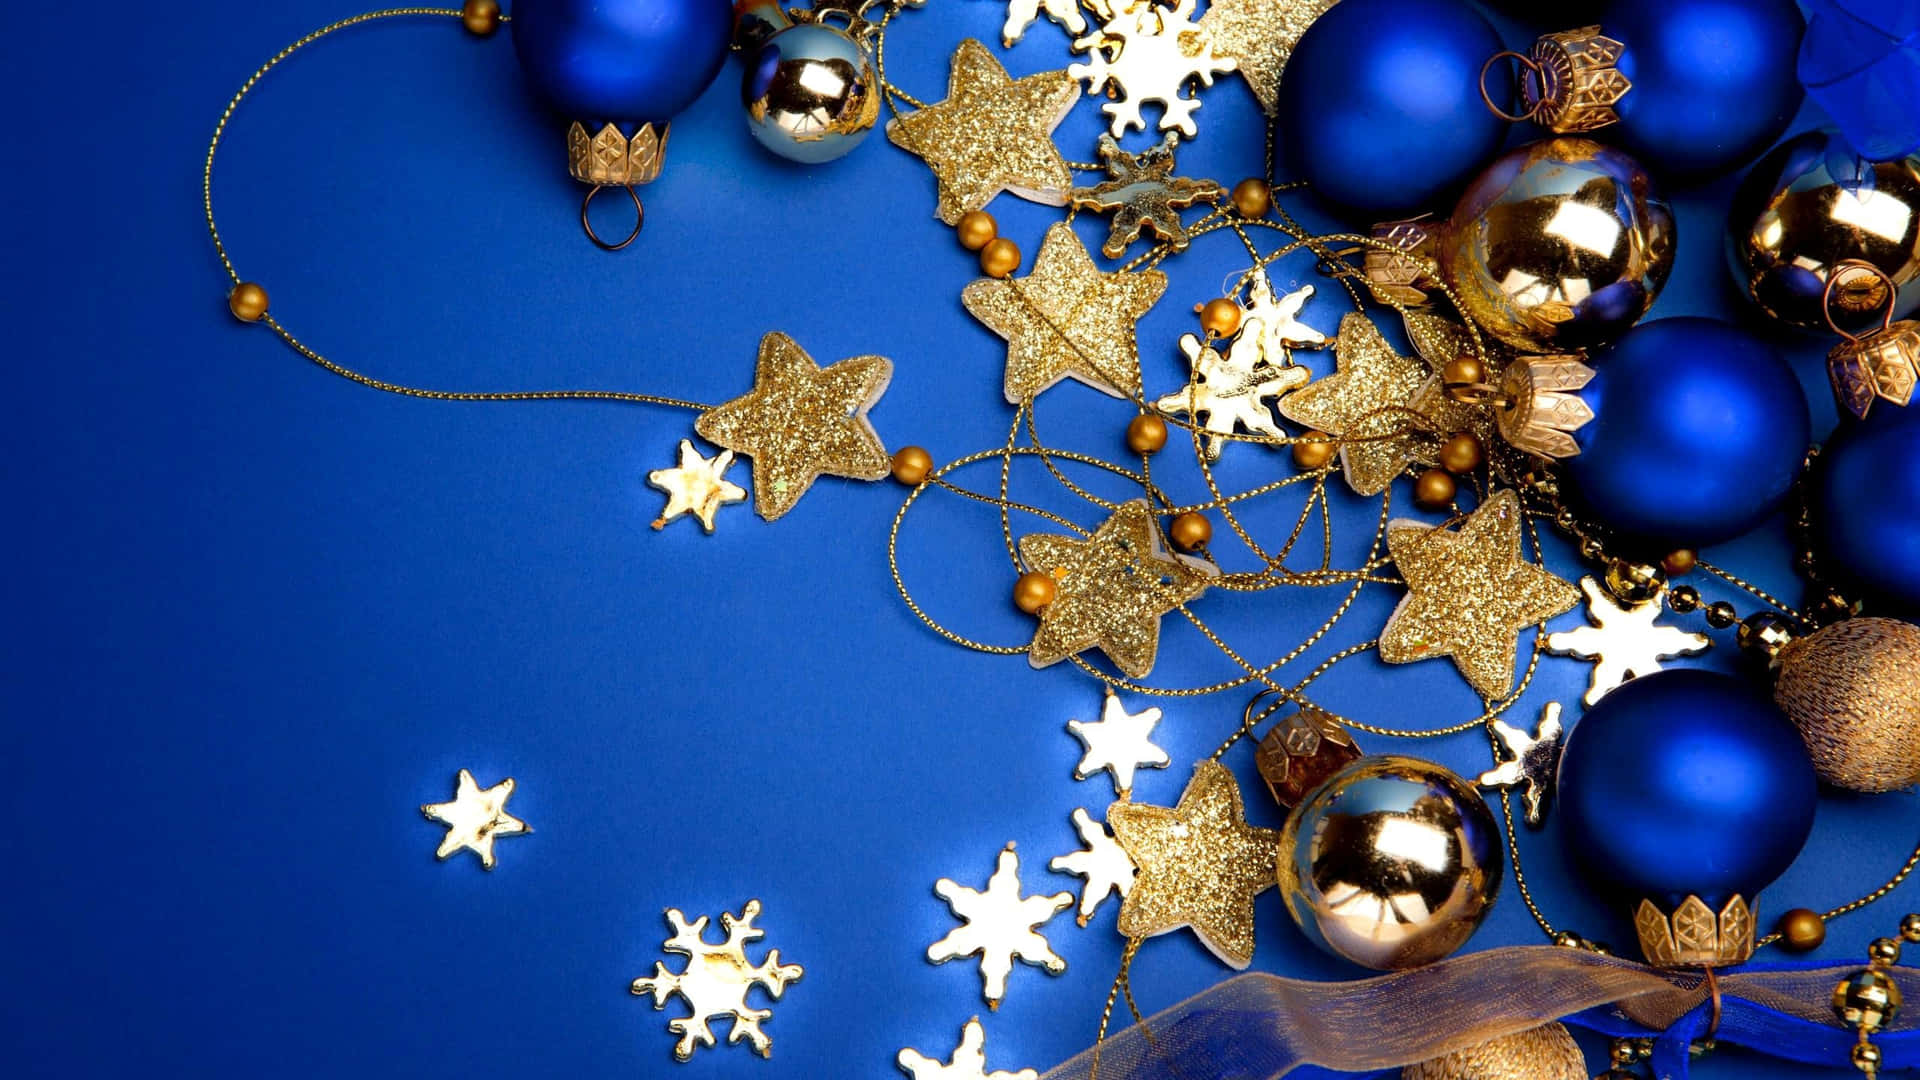 Celebrate in Luxury with This Gorgeous Blue and Gold Background